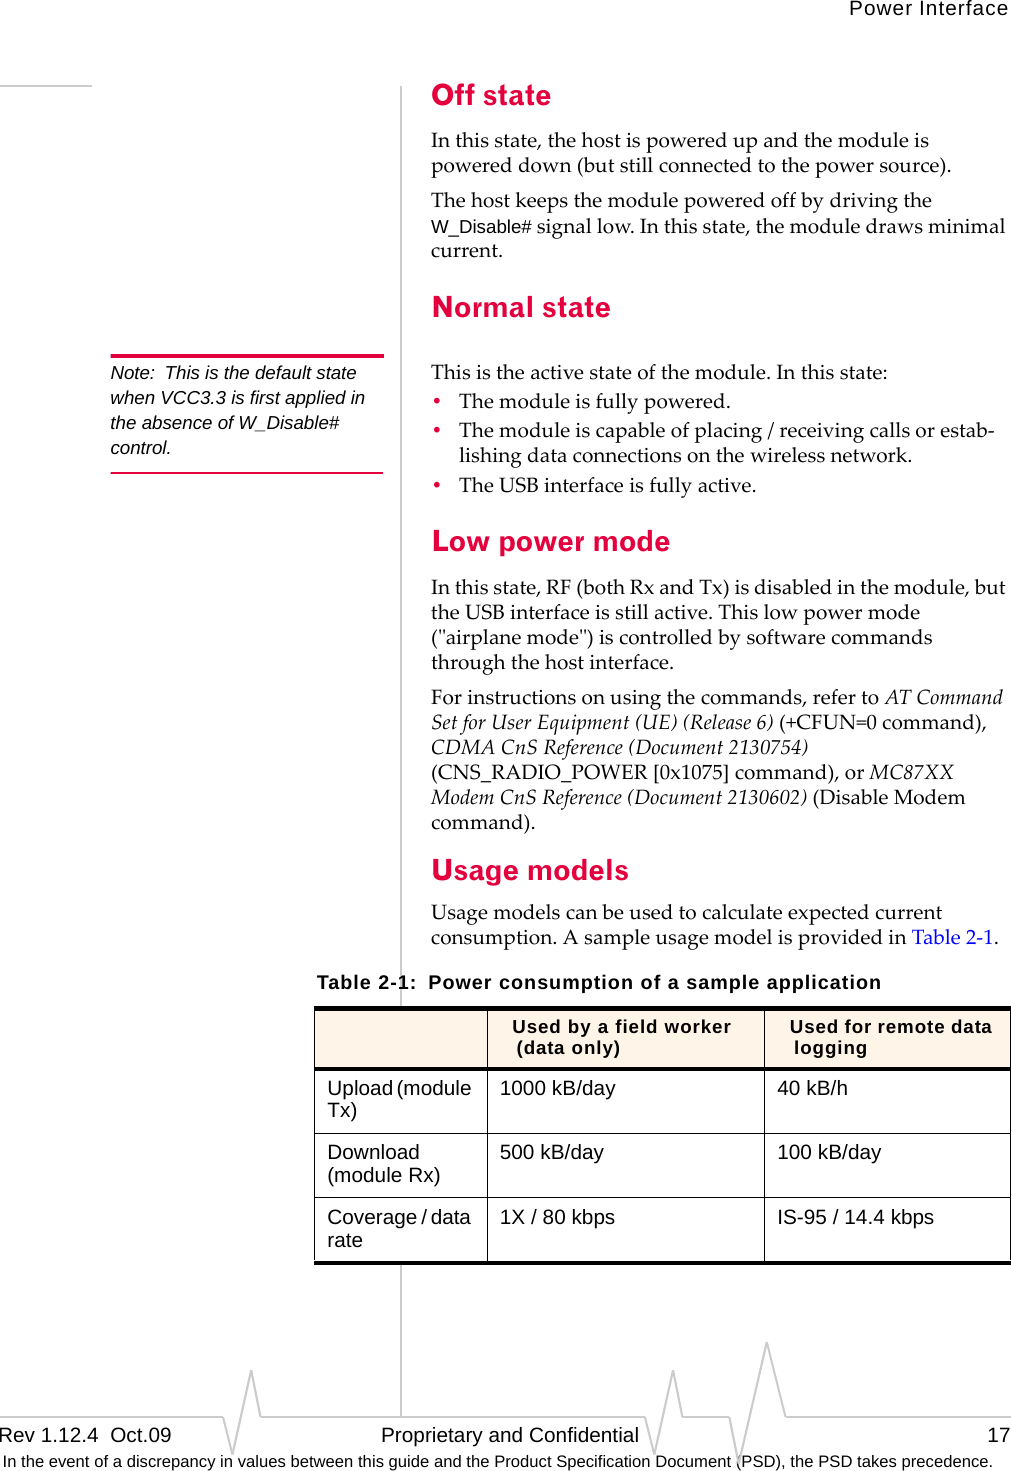 Power InterfaceRev 1.12.4  Oct.09   Proprietary and Confidential 17 In the event of a discrepancy in values between this guide and the Product Specification Document (PSD), the PSD takes precedence.Off stateInthisstate,thehostispoweredupandthemoduleispowereddown(butstillconnectedtothepowersource).ThehostkeepsthemodulepoweredoffbydrivingtheW_Disable#signallow.Inthisstate,themoduledrawsminimalcurrent.Normal stateNote: This is the default state when VCC3.3 is first applied in the absence of W_Disable# control.Thisistheactivestateofthemodule.Inthisstate:•Themoduleisfullypowered.•Themoduleiscapableofplacing/receivingcallsorestab‐lishingdataconnectionsonthewirelessnetwork.•TheUSBinterfaceisfullyactive.Low power modeInthisstate,RF(bothRxandTx)isdisabledinthemodule,buttheUSBinterfaceisstillactive.Thislowpowermode(ʺairplanemodeʺ)iscontrolledbysoftwarecommandsthroughthehostinterface.Forinstructionsonusingthecommands,refertoATCommandSetforUserEquipment(UE)(Release6)(+CFUN=0command),CDMACnSReference(Document2130754)(CNS_RADIO_POWER[0x1075]command),orMC87XXModemCnSReference(Document2130602)(DisableModemcommand).Usage modelsUsagemodelscanbeusedtocalculateexpectedcurrentconsumption.AsampleusagemodelisprovidedinTable2‐1.Table 2-1:  Power consumption of a sample application Used by a field worker (data only) Used for remote data loggingUpload (module Tx) 1000 kB/day 40 kB/hDownload (module Rx) 500 kB/day 100 kB/dayCoverage / data rate 1X / 80 kbps IS-95 / 14.4 kbps